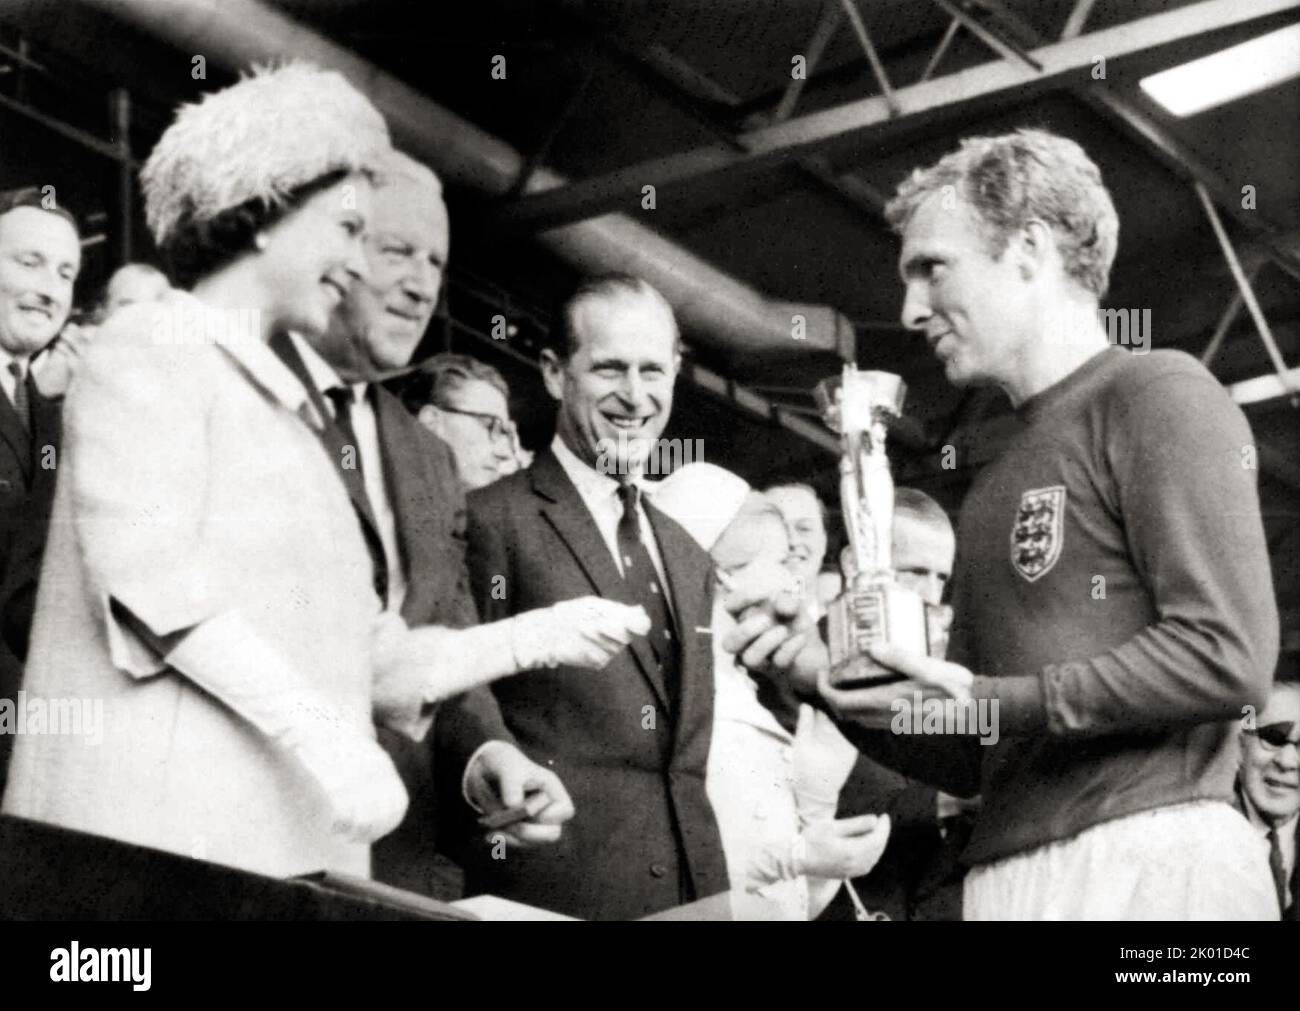 Queen Elizabeth II awarding the Jules Rimet Trophy to Sir Bobby Moore, captain of the World Cup winning England football team at Wembley Stadium in 1966. Stock Photo